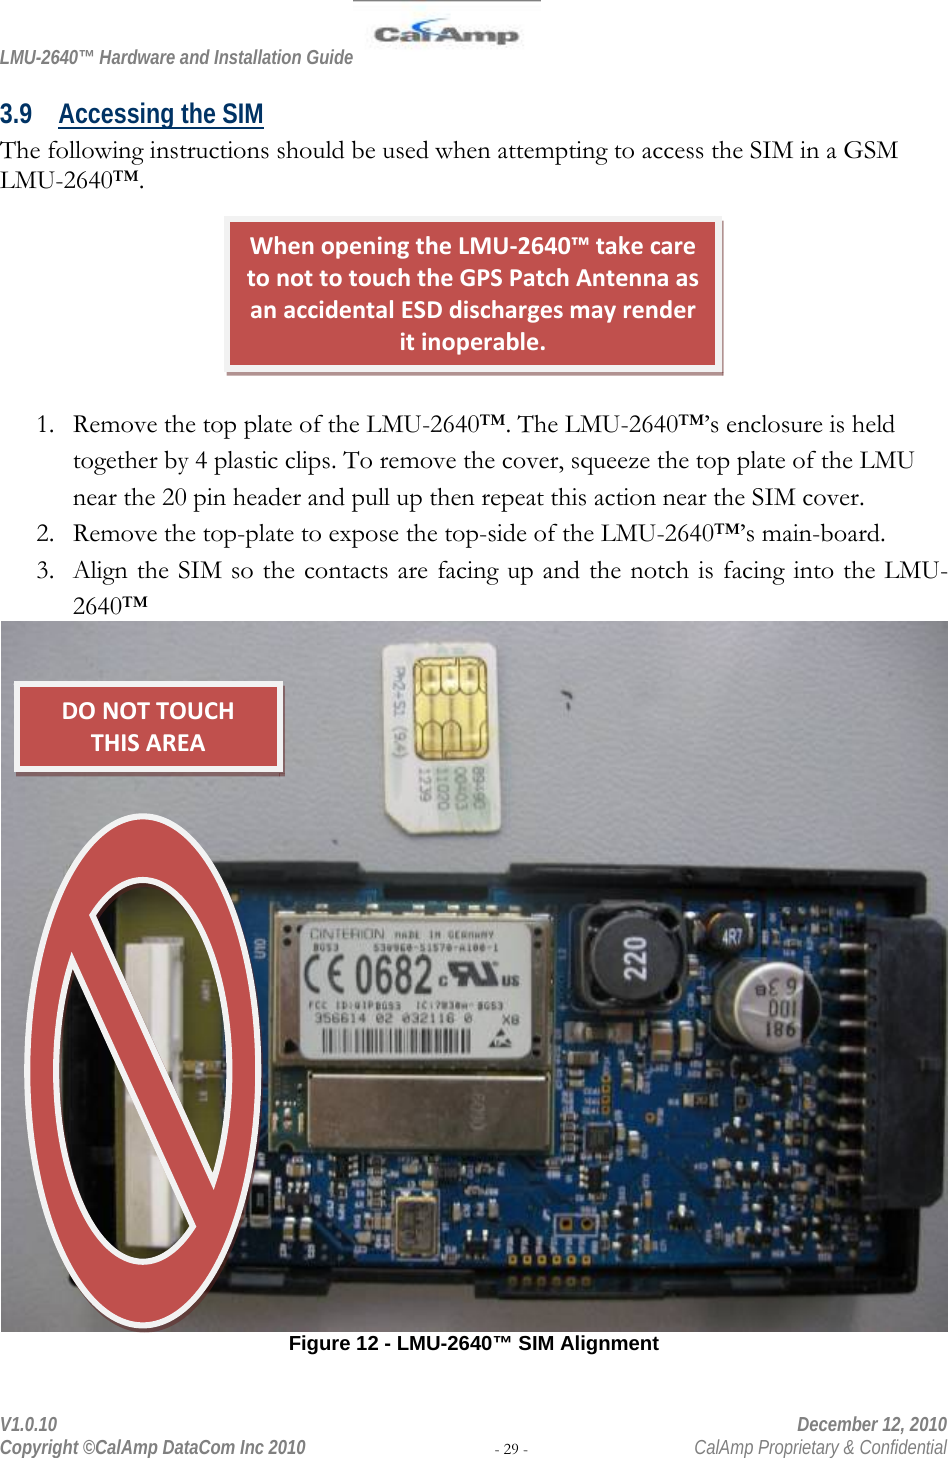 LMU-2640™ Hardware and Installation Guide  V1.0.10    December 12, 2010 Copyright ©CalAmp DataCom Inc 2010 - 29 -  CalAmp Proprietary &amp; Confidential 3.9 Accessing the SIM The following instructions should be used when attempting to access the SIM in a GSM LMU-2640™.        1. Remove the top plate of the LMU-2640™. The LMU-2640™’s enclosure is held together by 4 plastic clips. To remove the cover, squeeze the top plate of the LMU near the 20 pin header and pull up then repeat this action near the SIM cover.  2. Remove the top-plate to expose the top-side of the LMU-2640™’s main-board. 3. Align the SIM so the contacts are facing up and the notch is facing into the LMU-2640™  Figure 12 - LMU-2640™ SIM Alignment WhenopeningtheLMU‐2640™takecaretonottotouchtheGPSPatchAntennaasanaccidentalESDdischargesmayrenderitinoperable.DONOTTOUCHTHISAREA